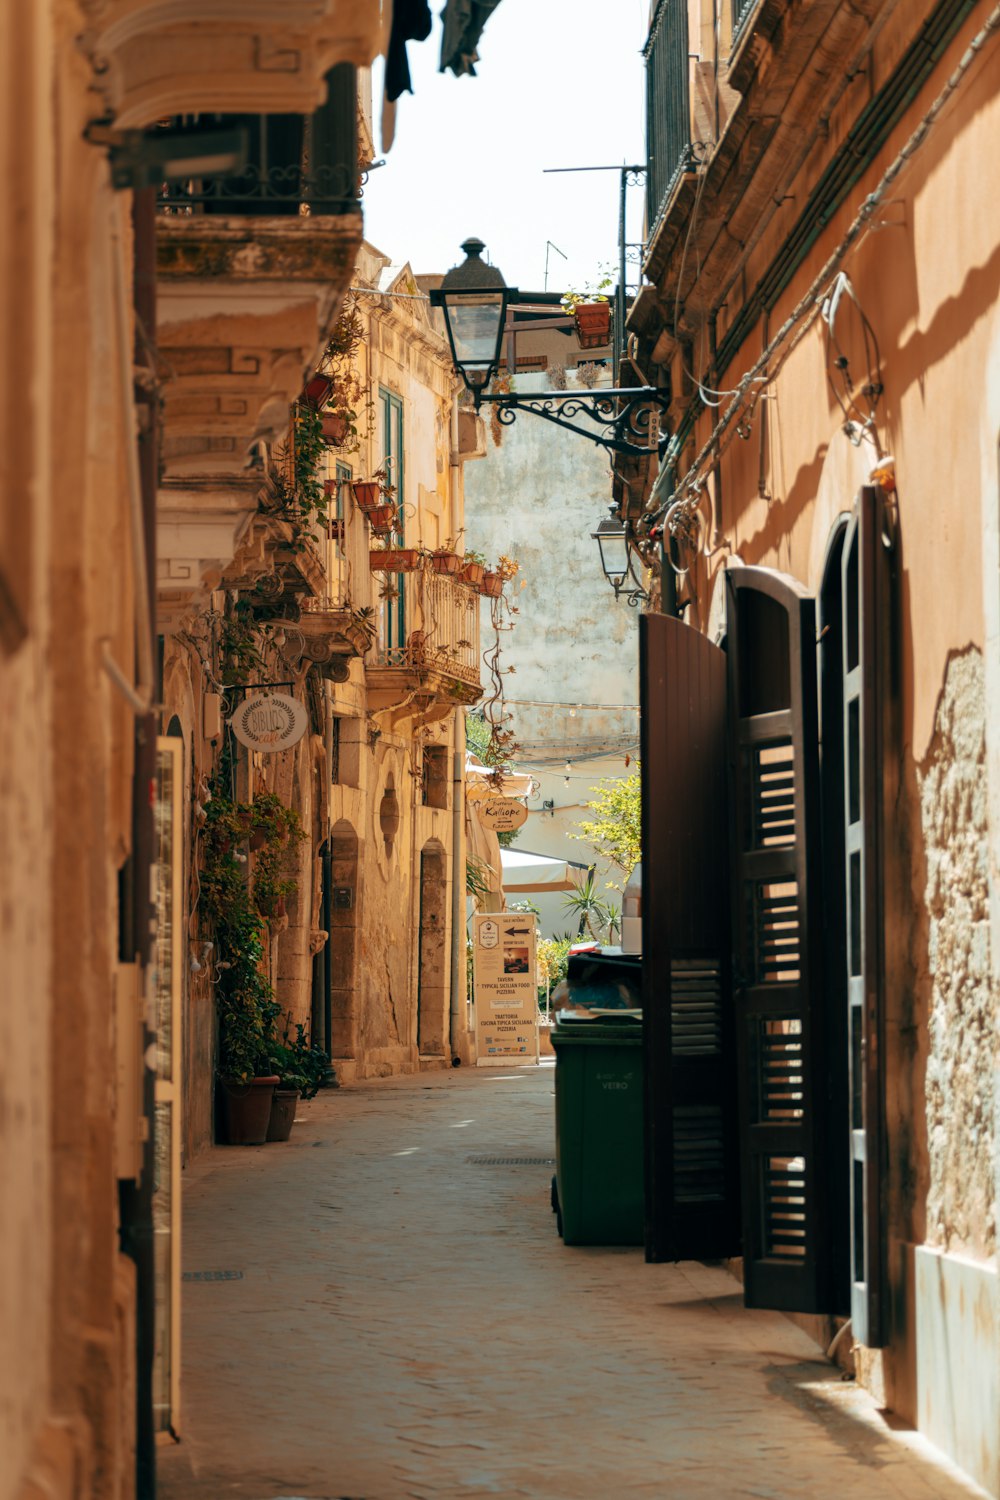 a narrow alley way with a green trash can